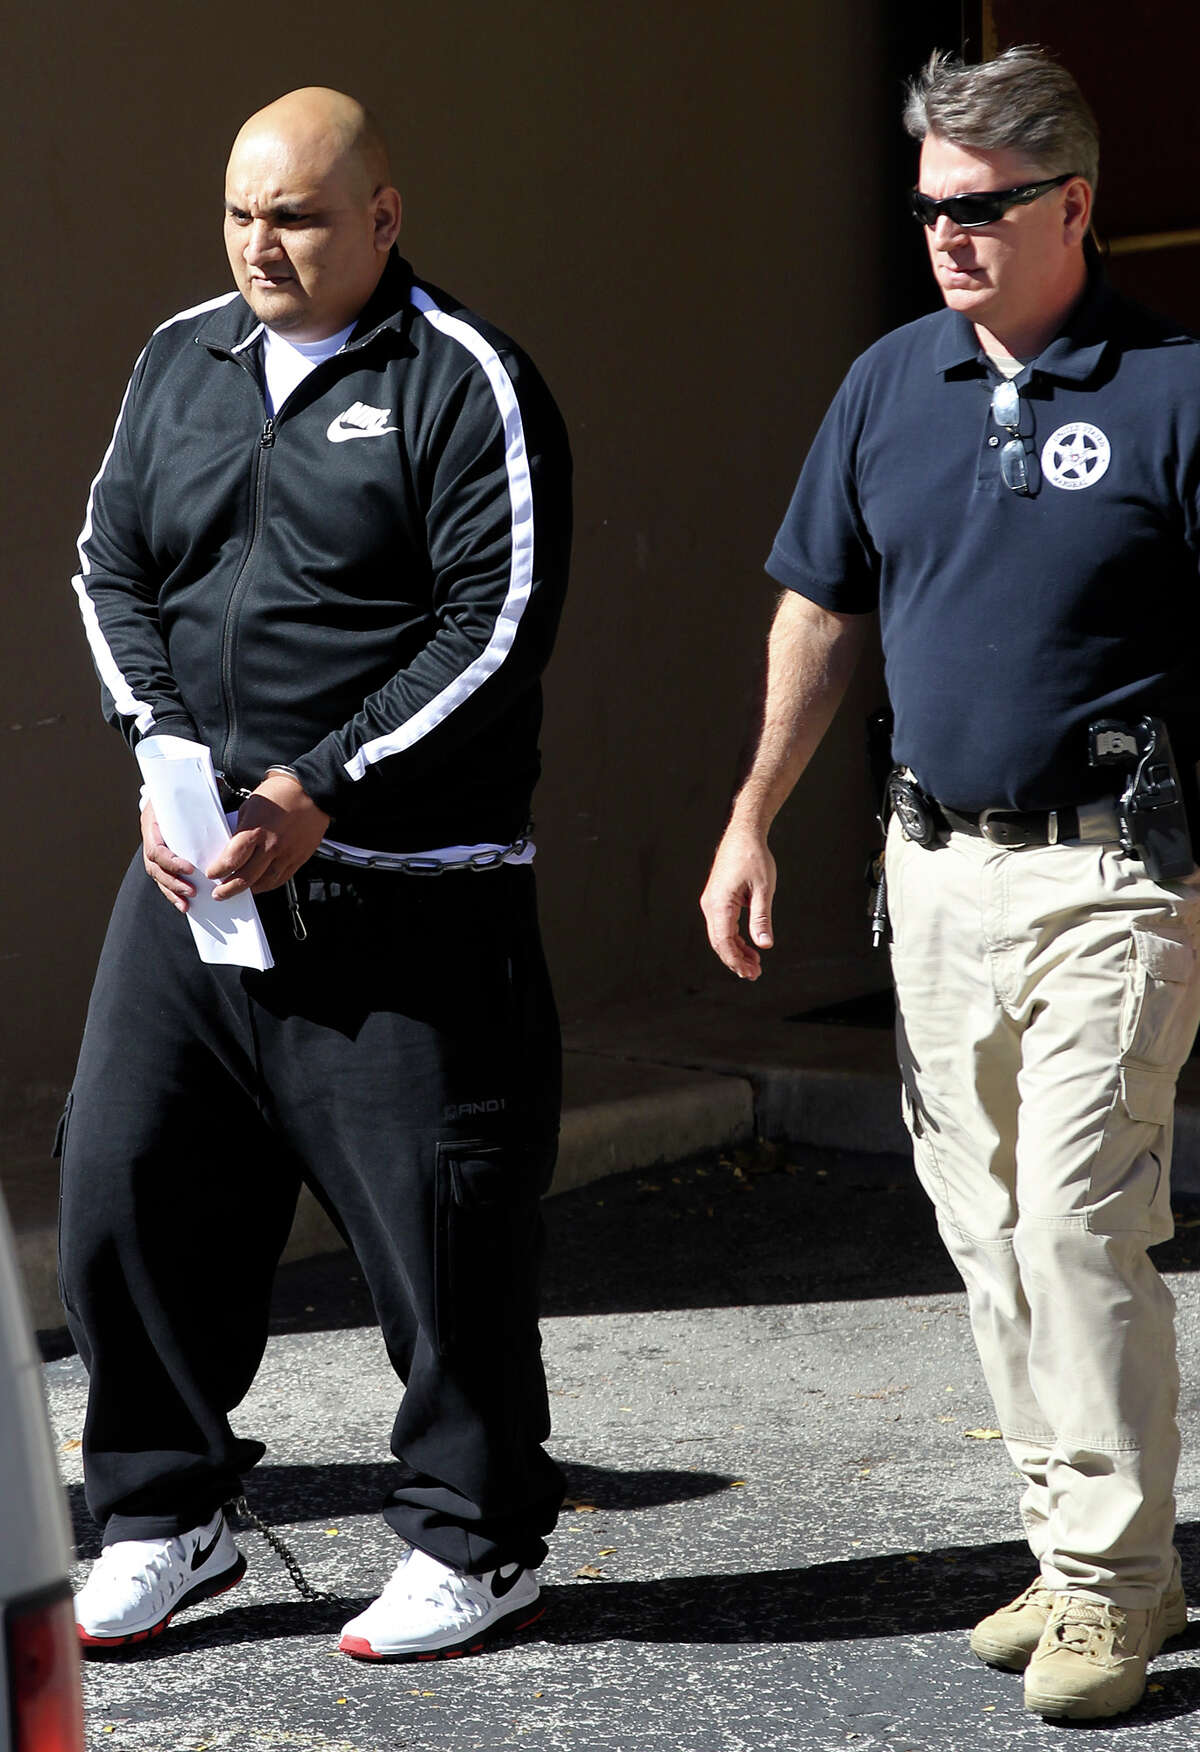 Ruben Reyes (left) is escorted Wednesday November 26, 2014 out of the Federal Courthouse in San Antonio, Texas. Reyes,36, is a purported enforcer for the Texas Mexican Mafia and was arrested on charges he killed three high-ranking members of the same gang and is also suspected of having given orders to kill Balcones Heights Police Officer Julian Pesina.